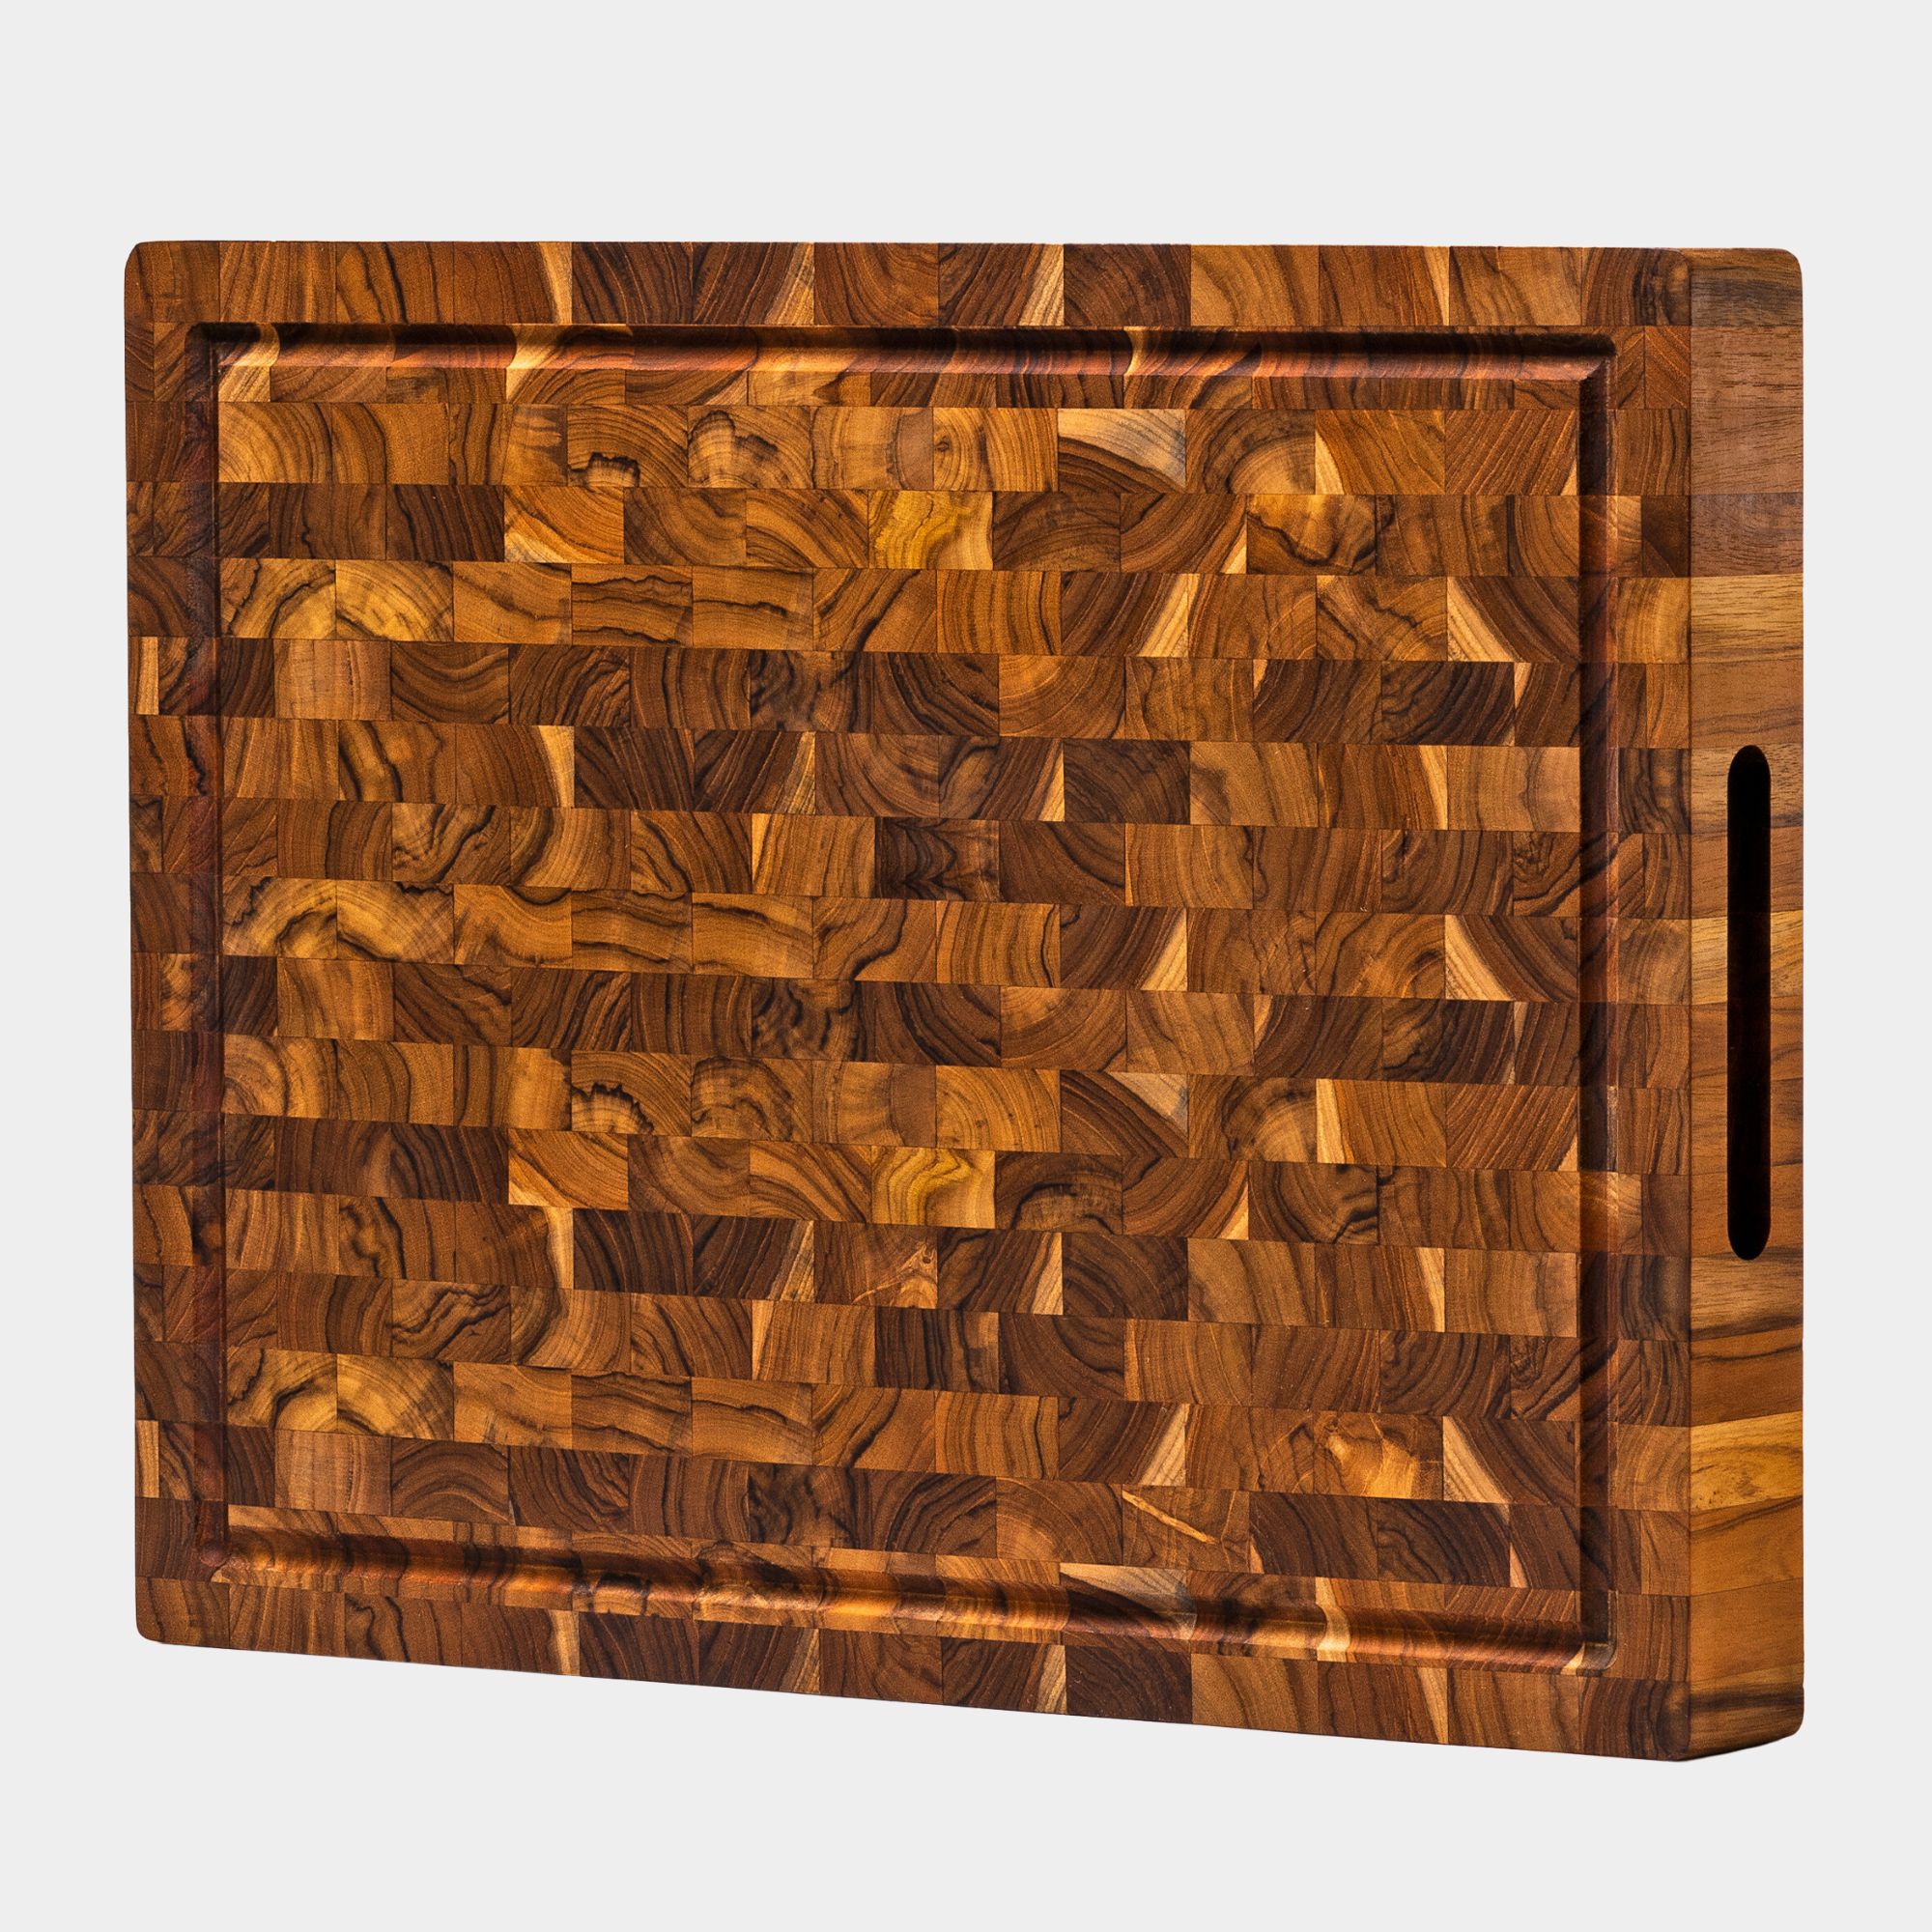 Large End Grain Teak Wood Cutting Board Cured with Beeswax and Natural Oils  – Ziruma